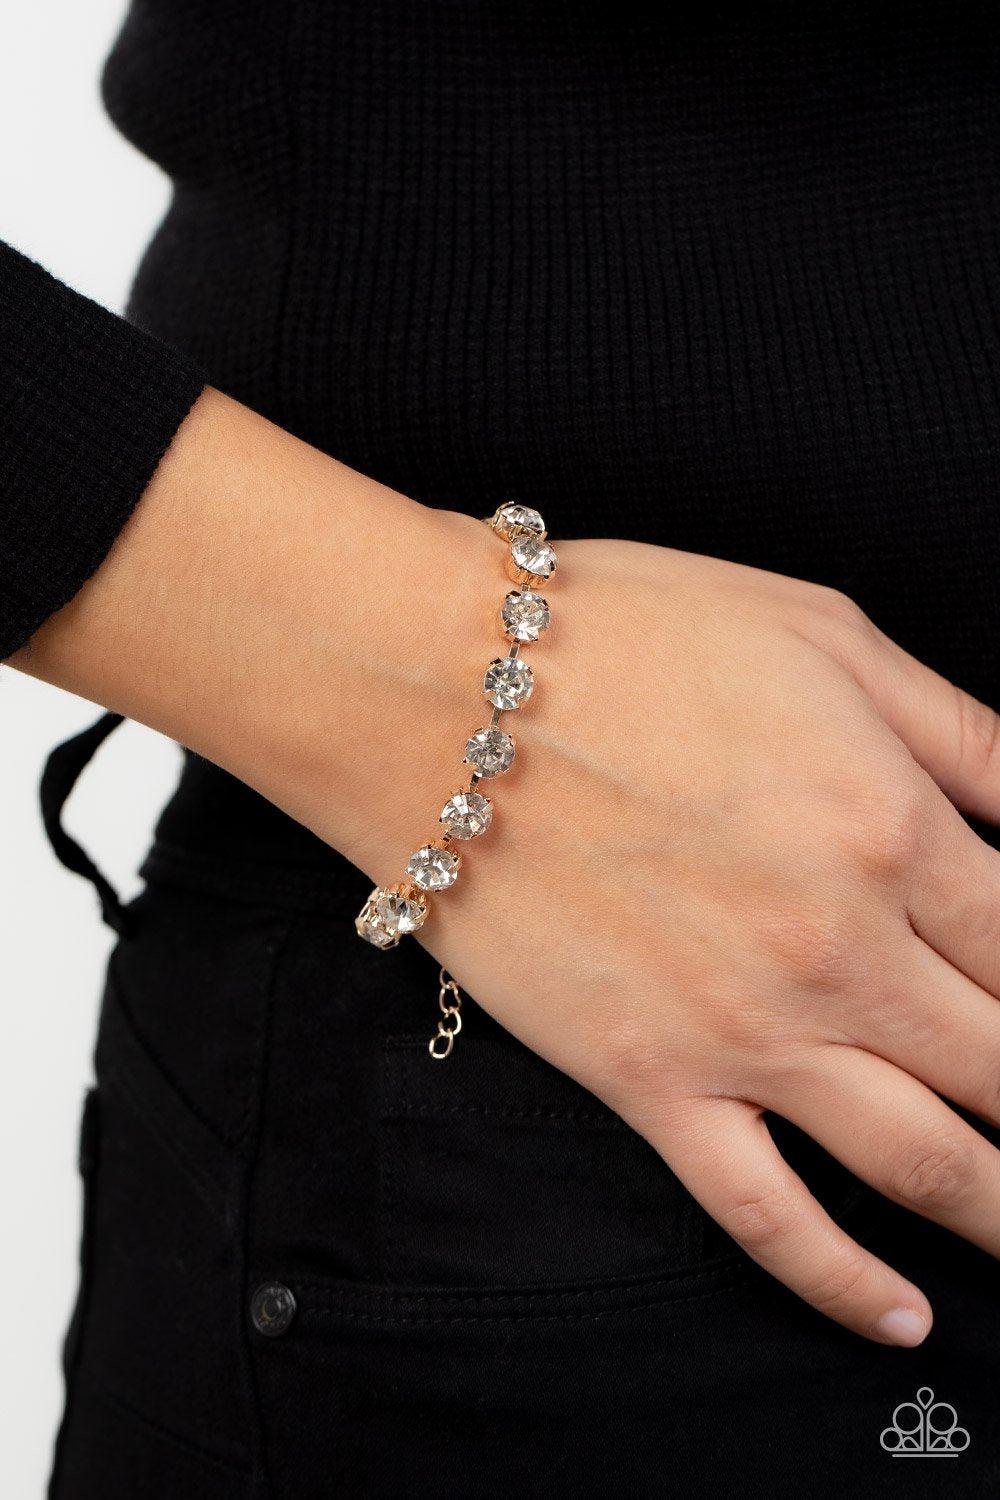 A-Lister Afterglow Gold and White Rhinestone Bracelet - Paparazzi Accessories- lightbox - CarasShop.com - $5 Jewelry by Cara Jewels